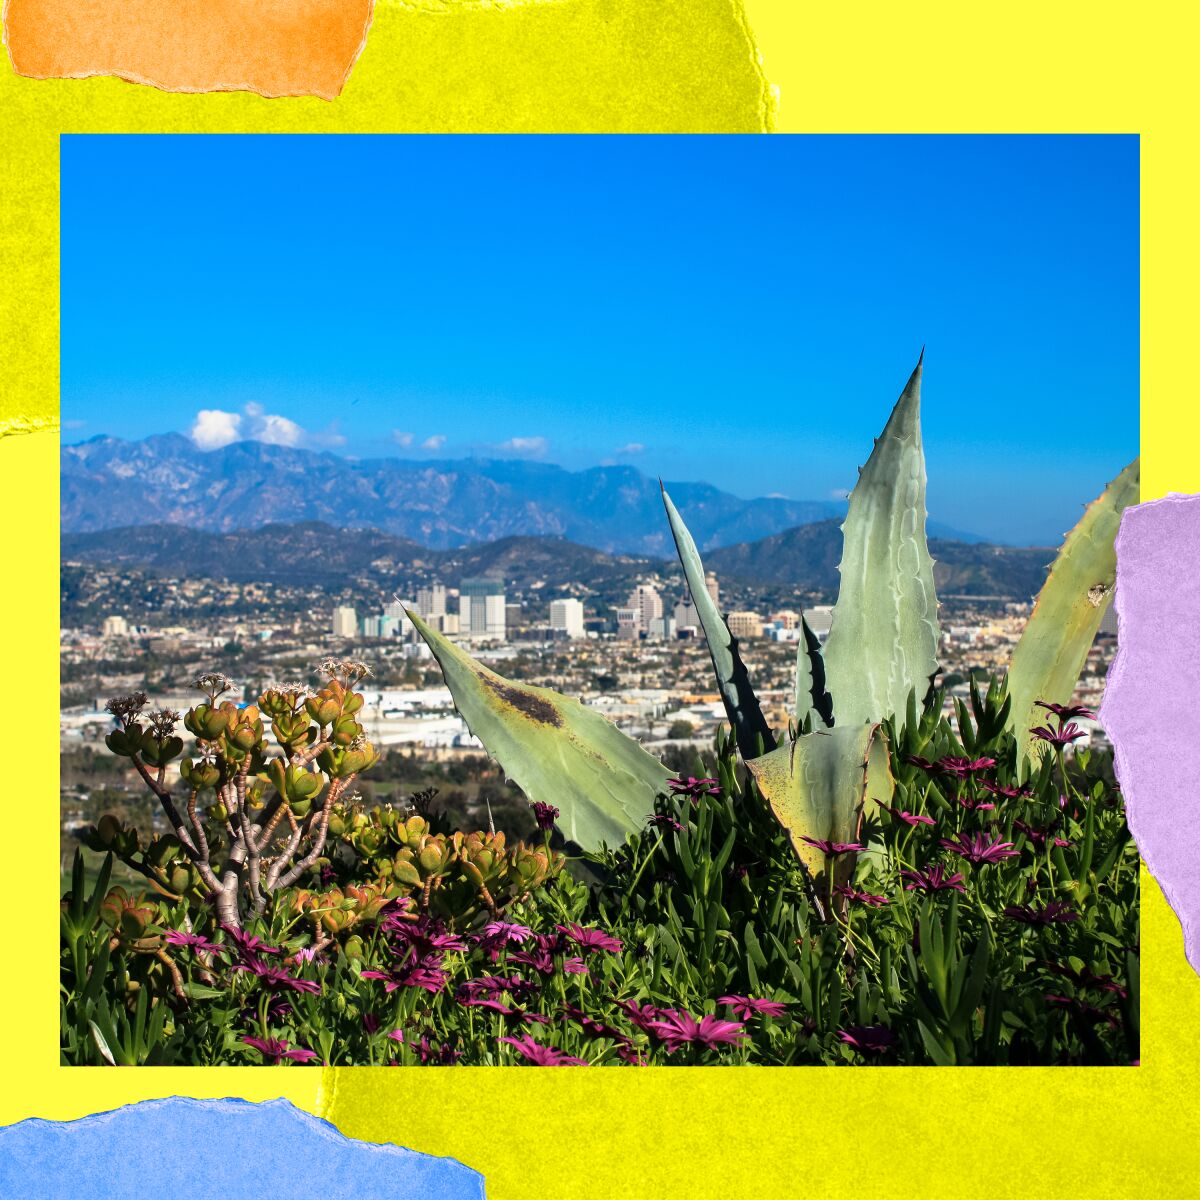 The view from Amir’s Garden in Griffith Park: Flowering plants in the foreground and the city beyond.